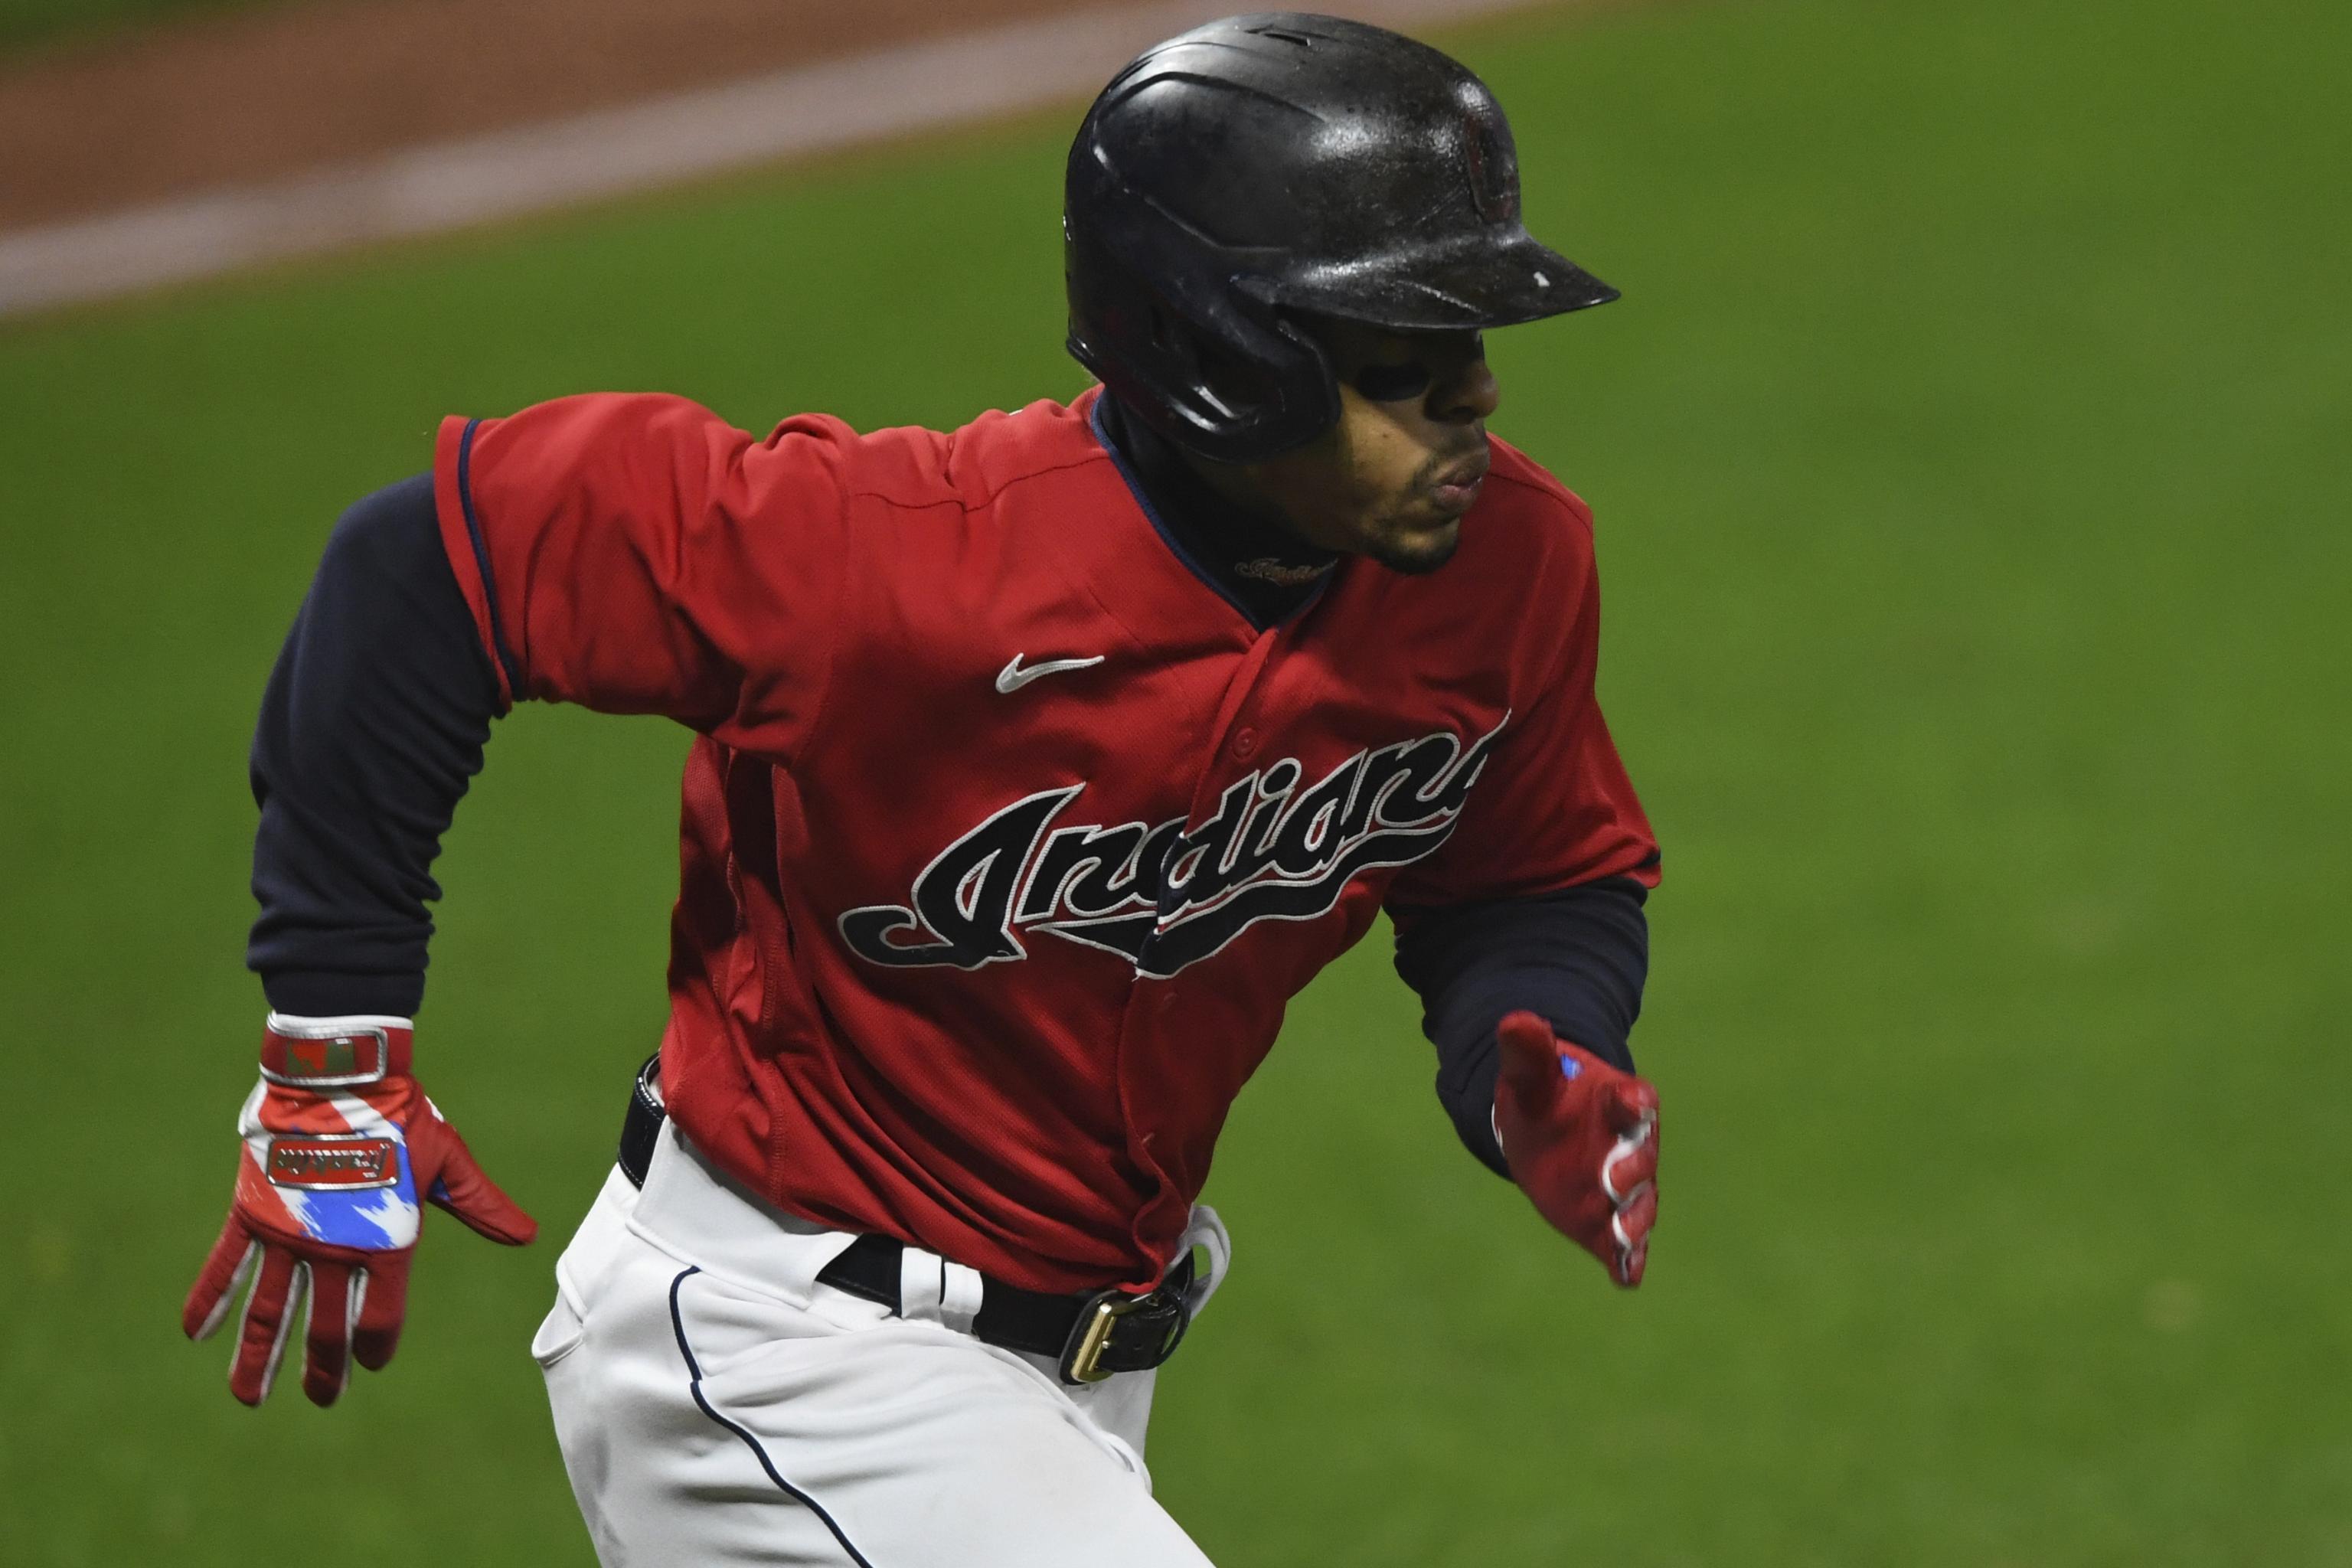 Report: Blue Jays inquired about trading for Francisco Lindor